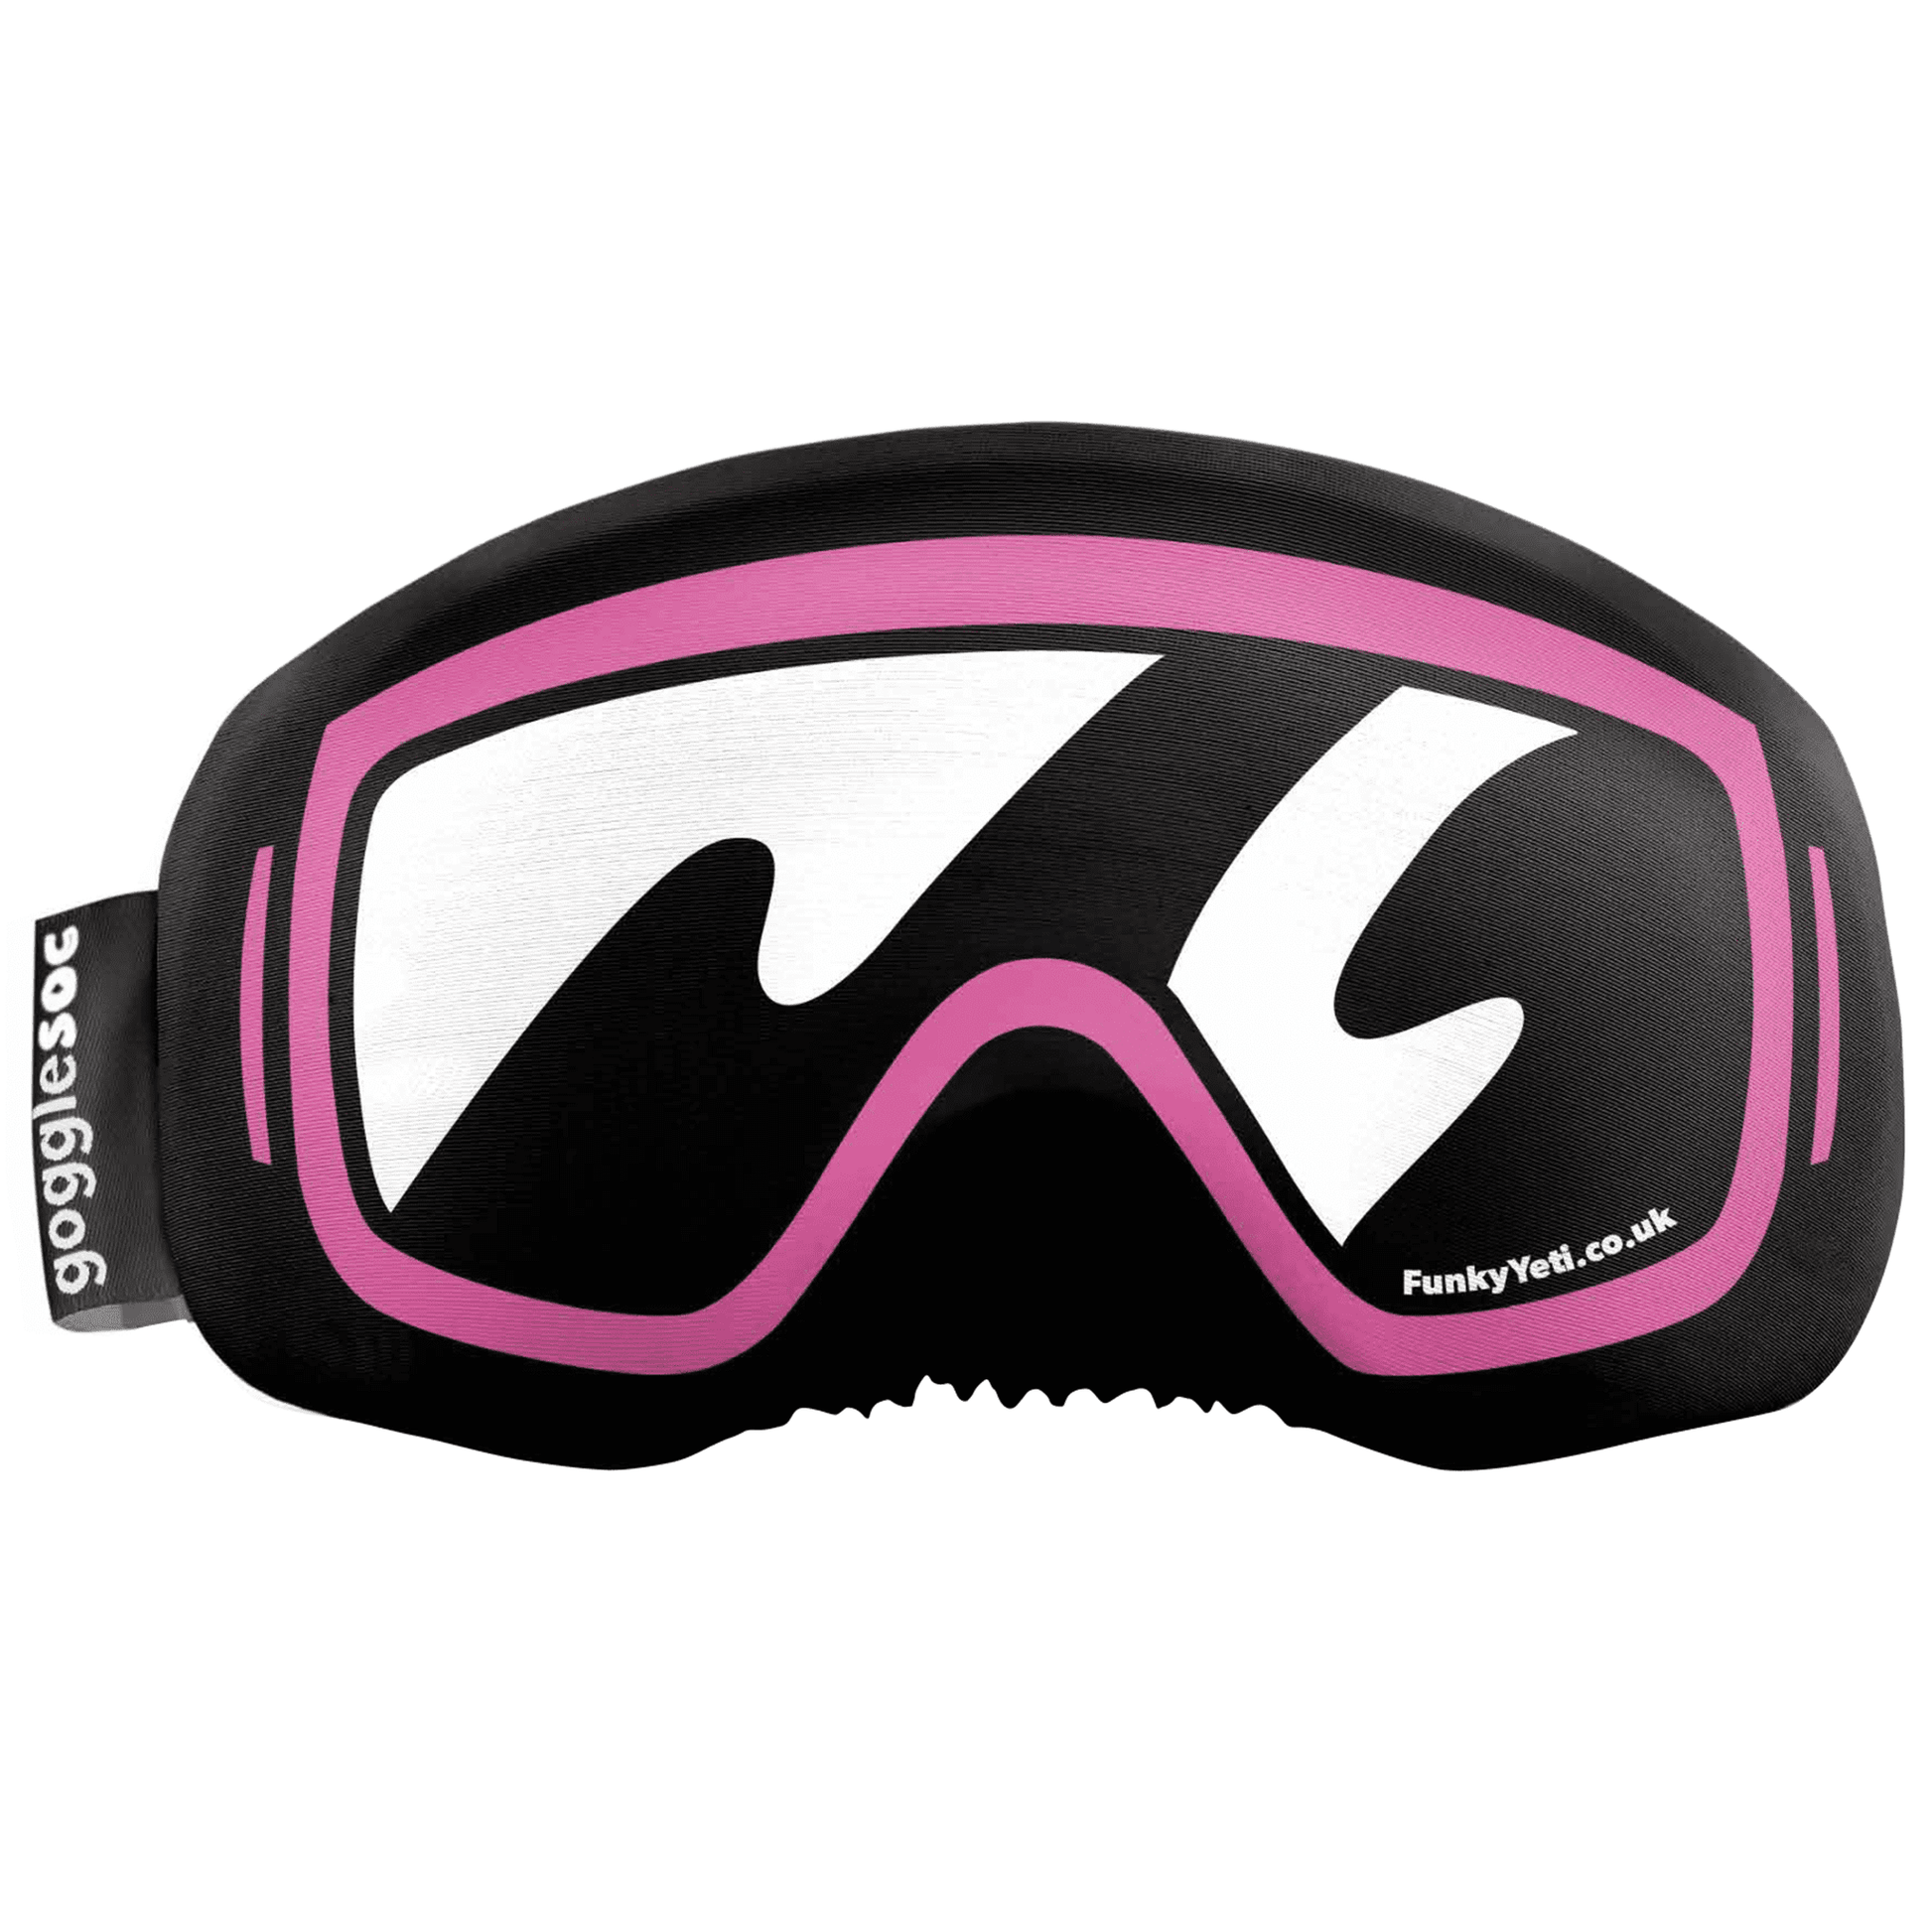 Gogglesoc - Funky Yeti Soc Pink Exclusive Goggle Cover